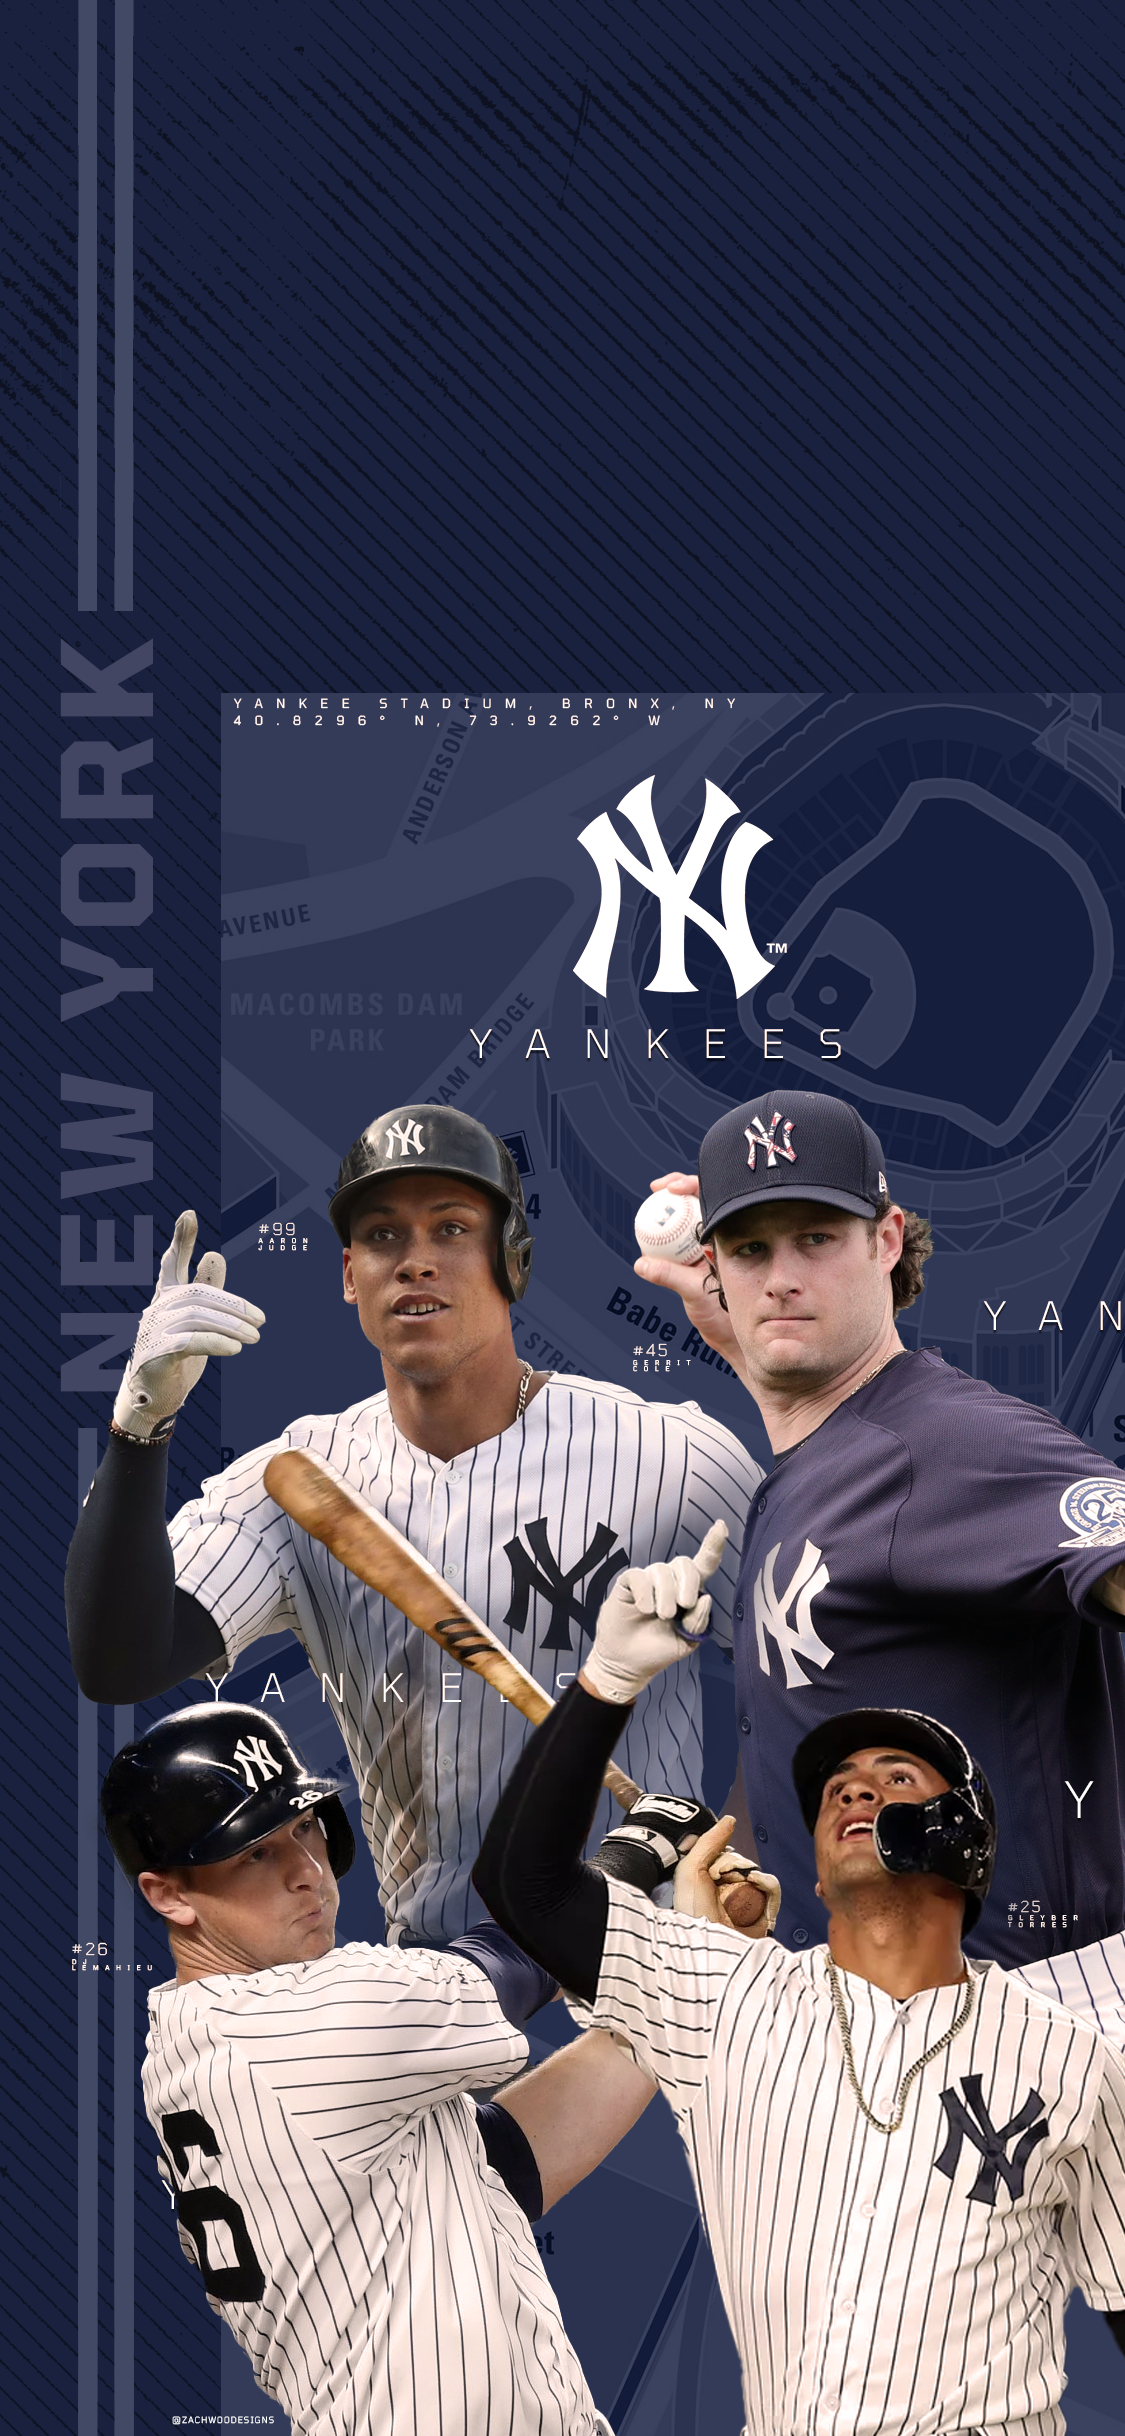 OC Baseball is back in the Bronx! Here's a Yankees wallpaper for your phone that I made this week